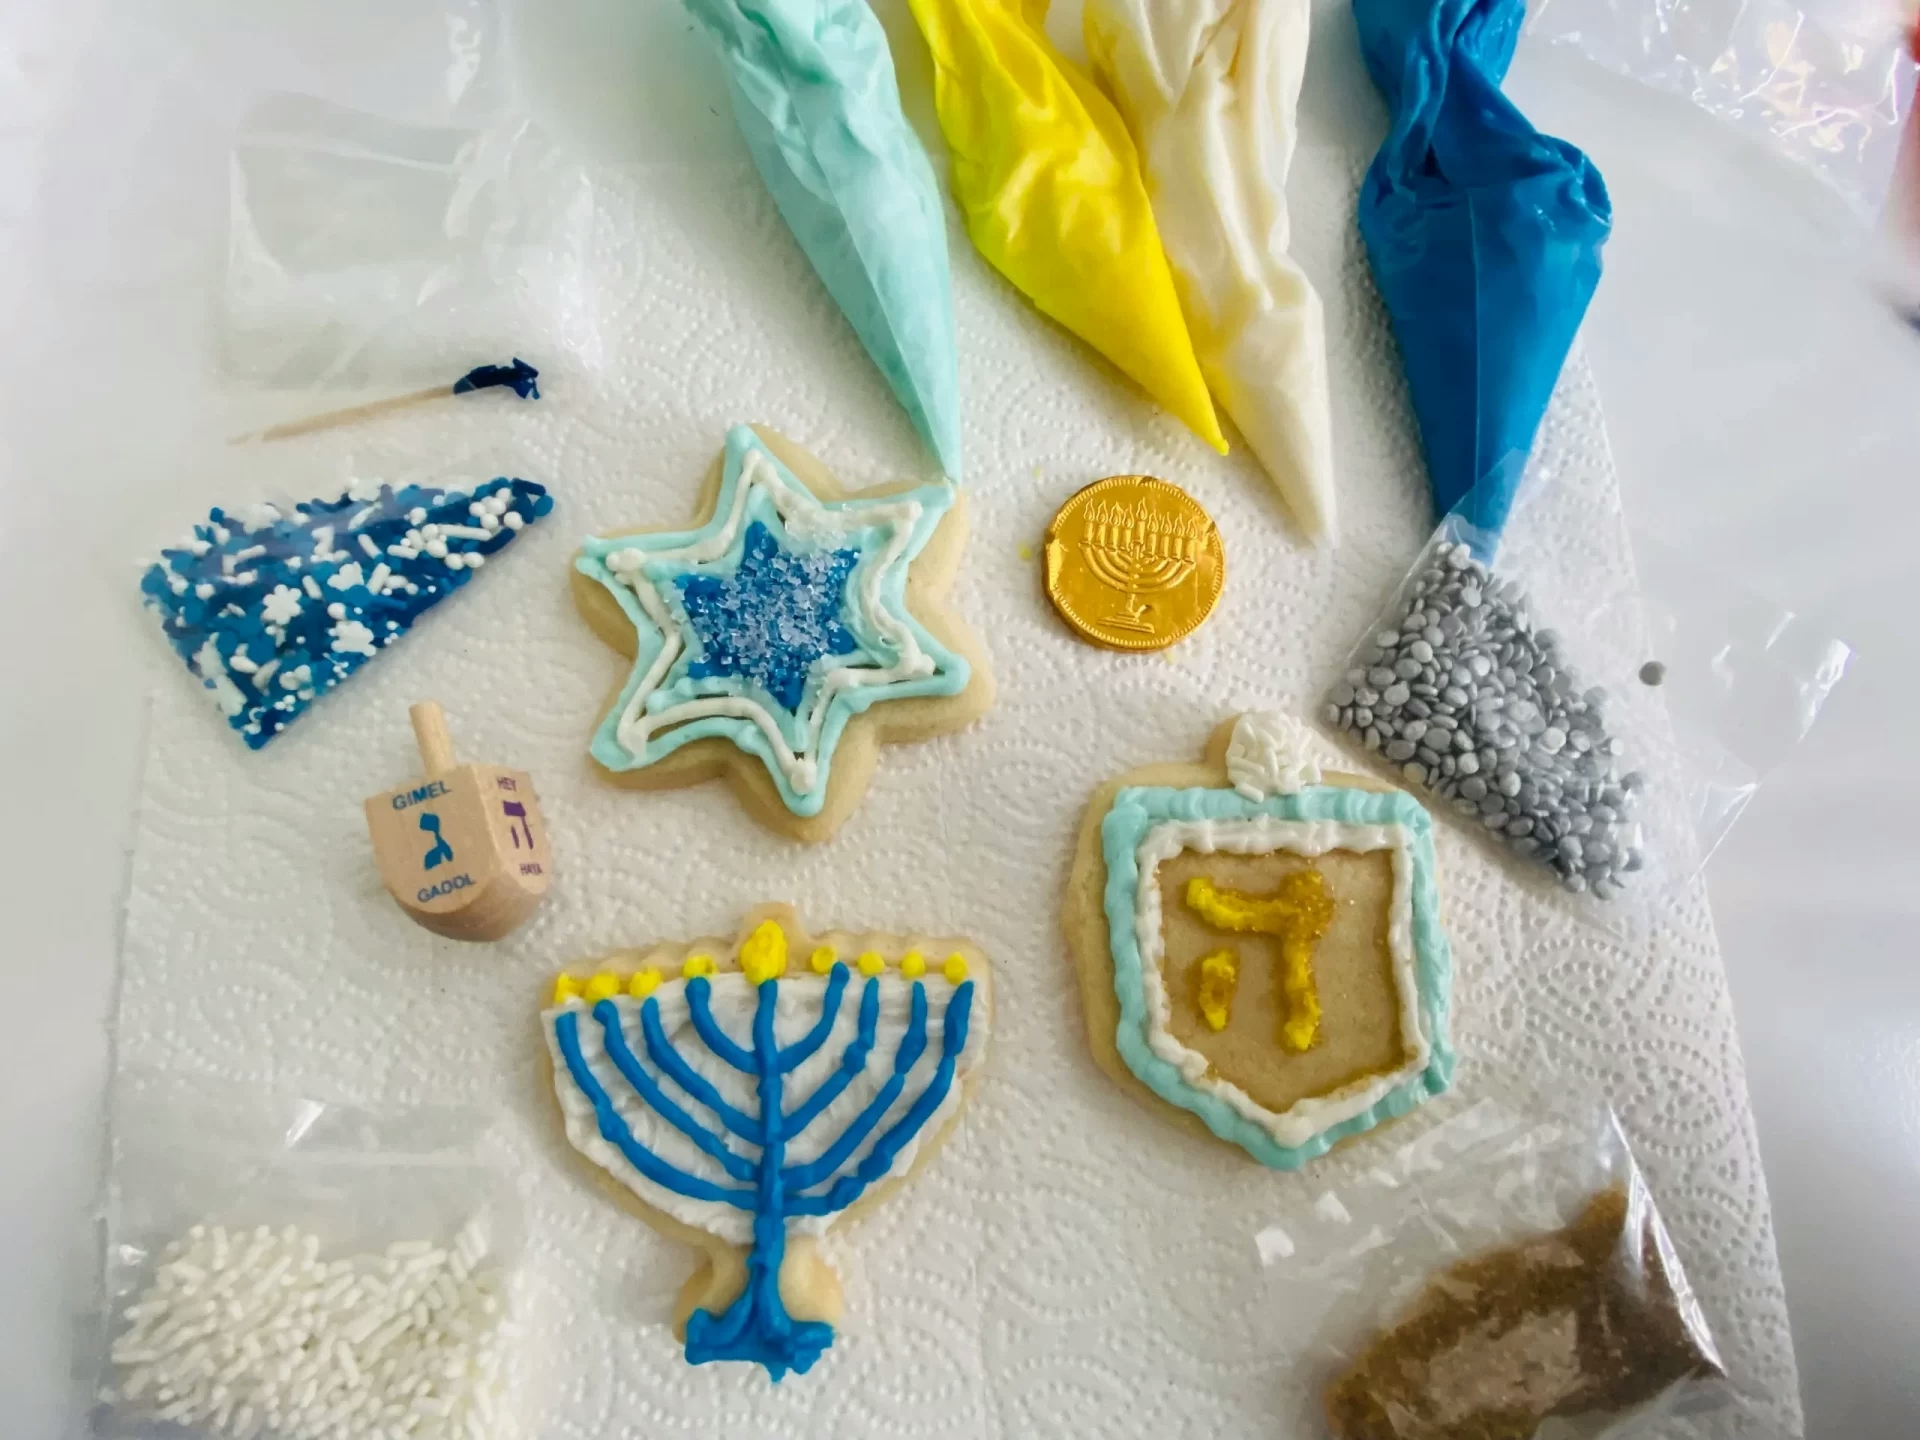 Cookies from a virtual cookie-decorating celebration to celebrate Hanukkah 2021